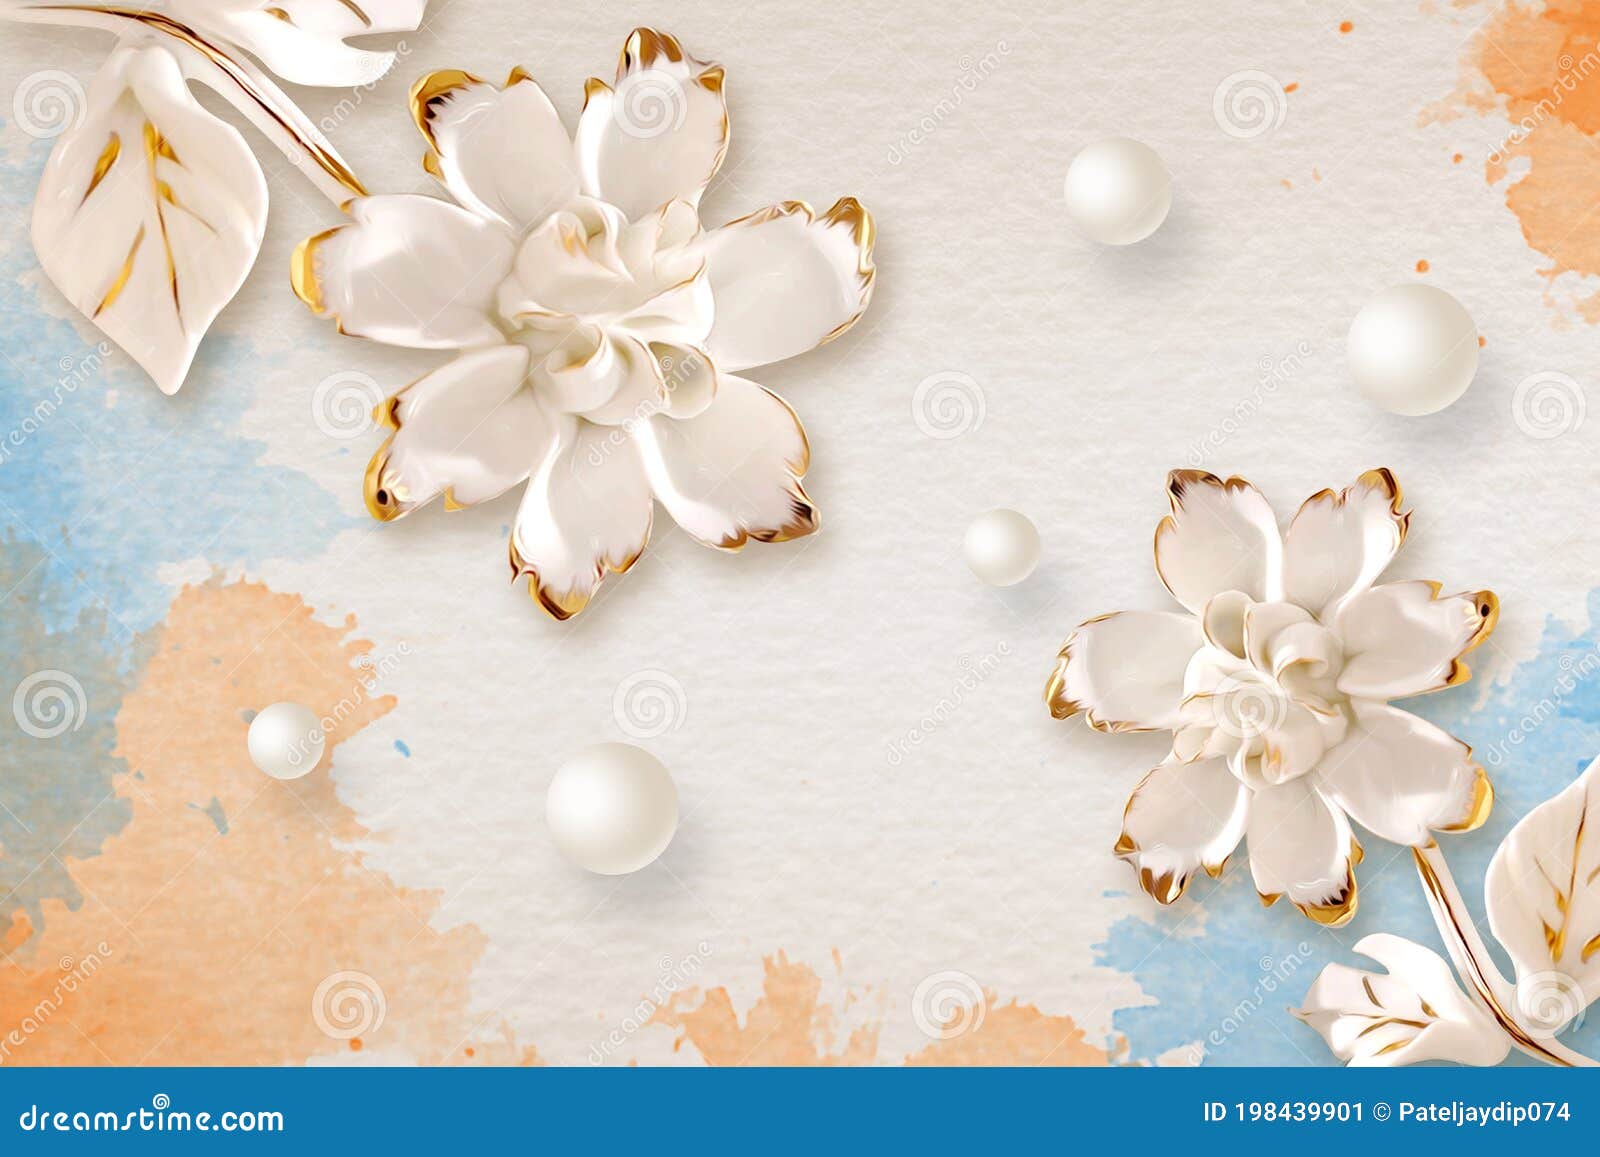 3D Wallpaper Design with White Flower and Colorful Background Stock